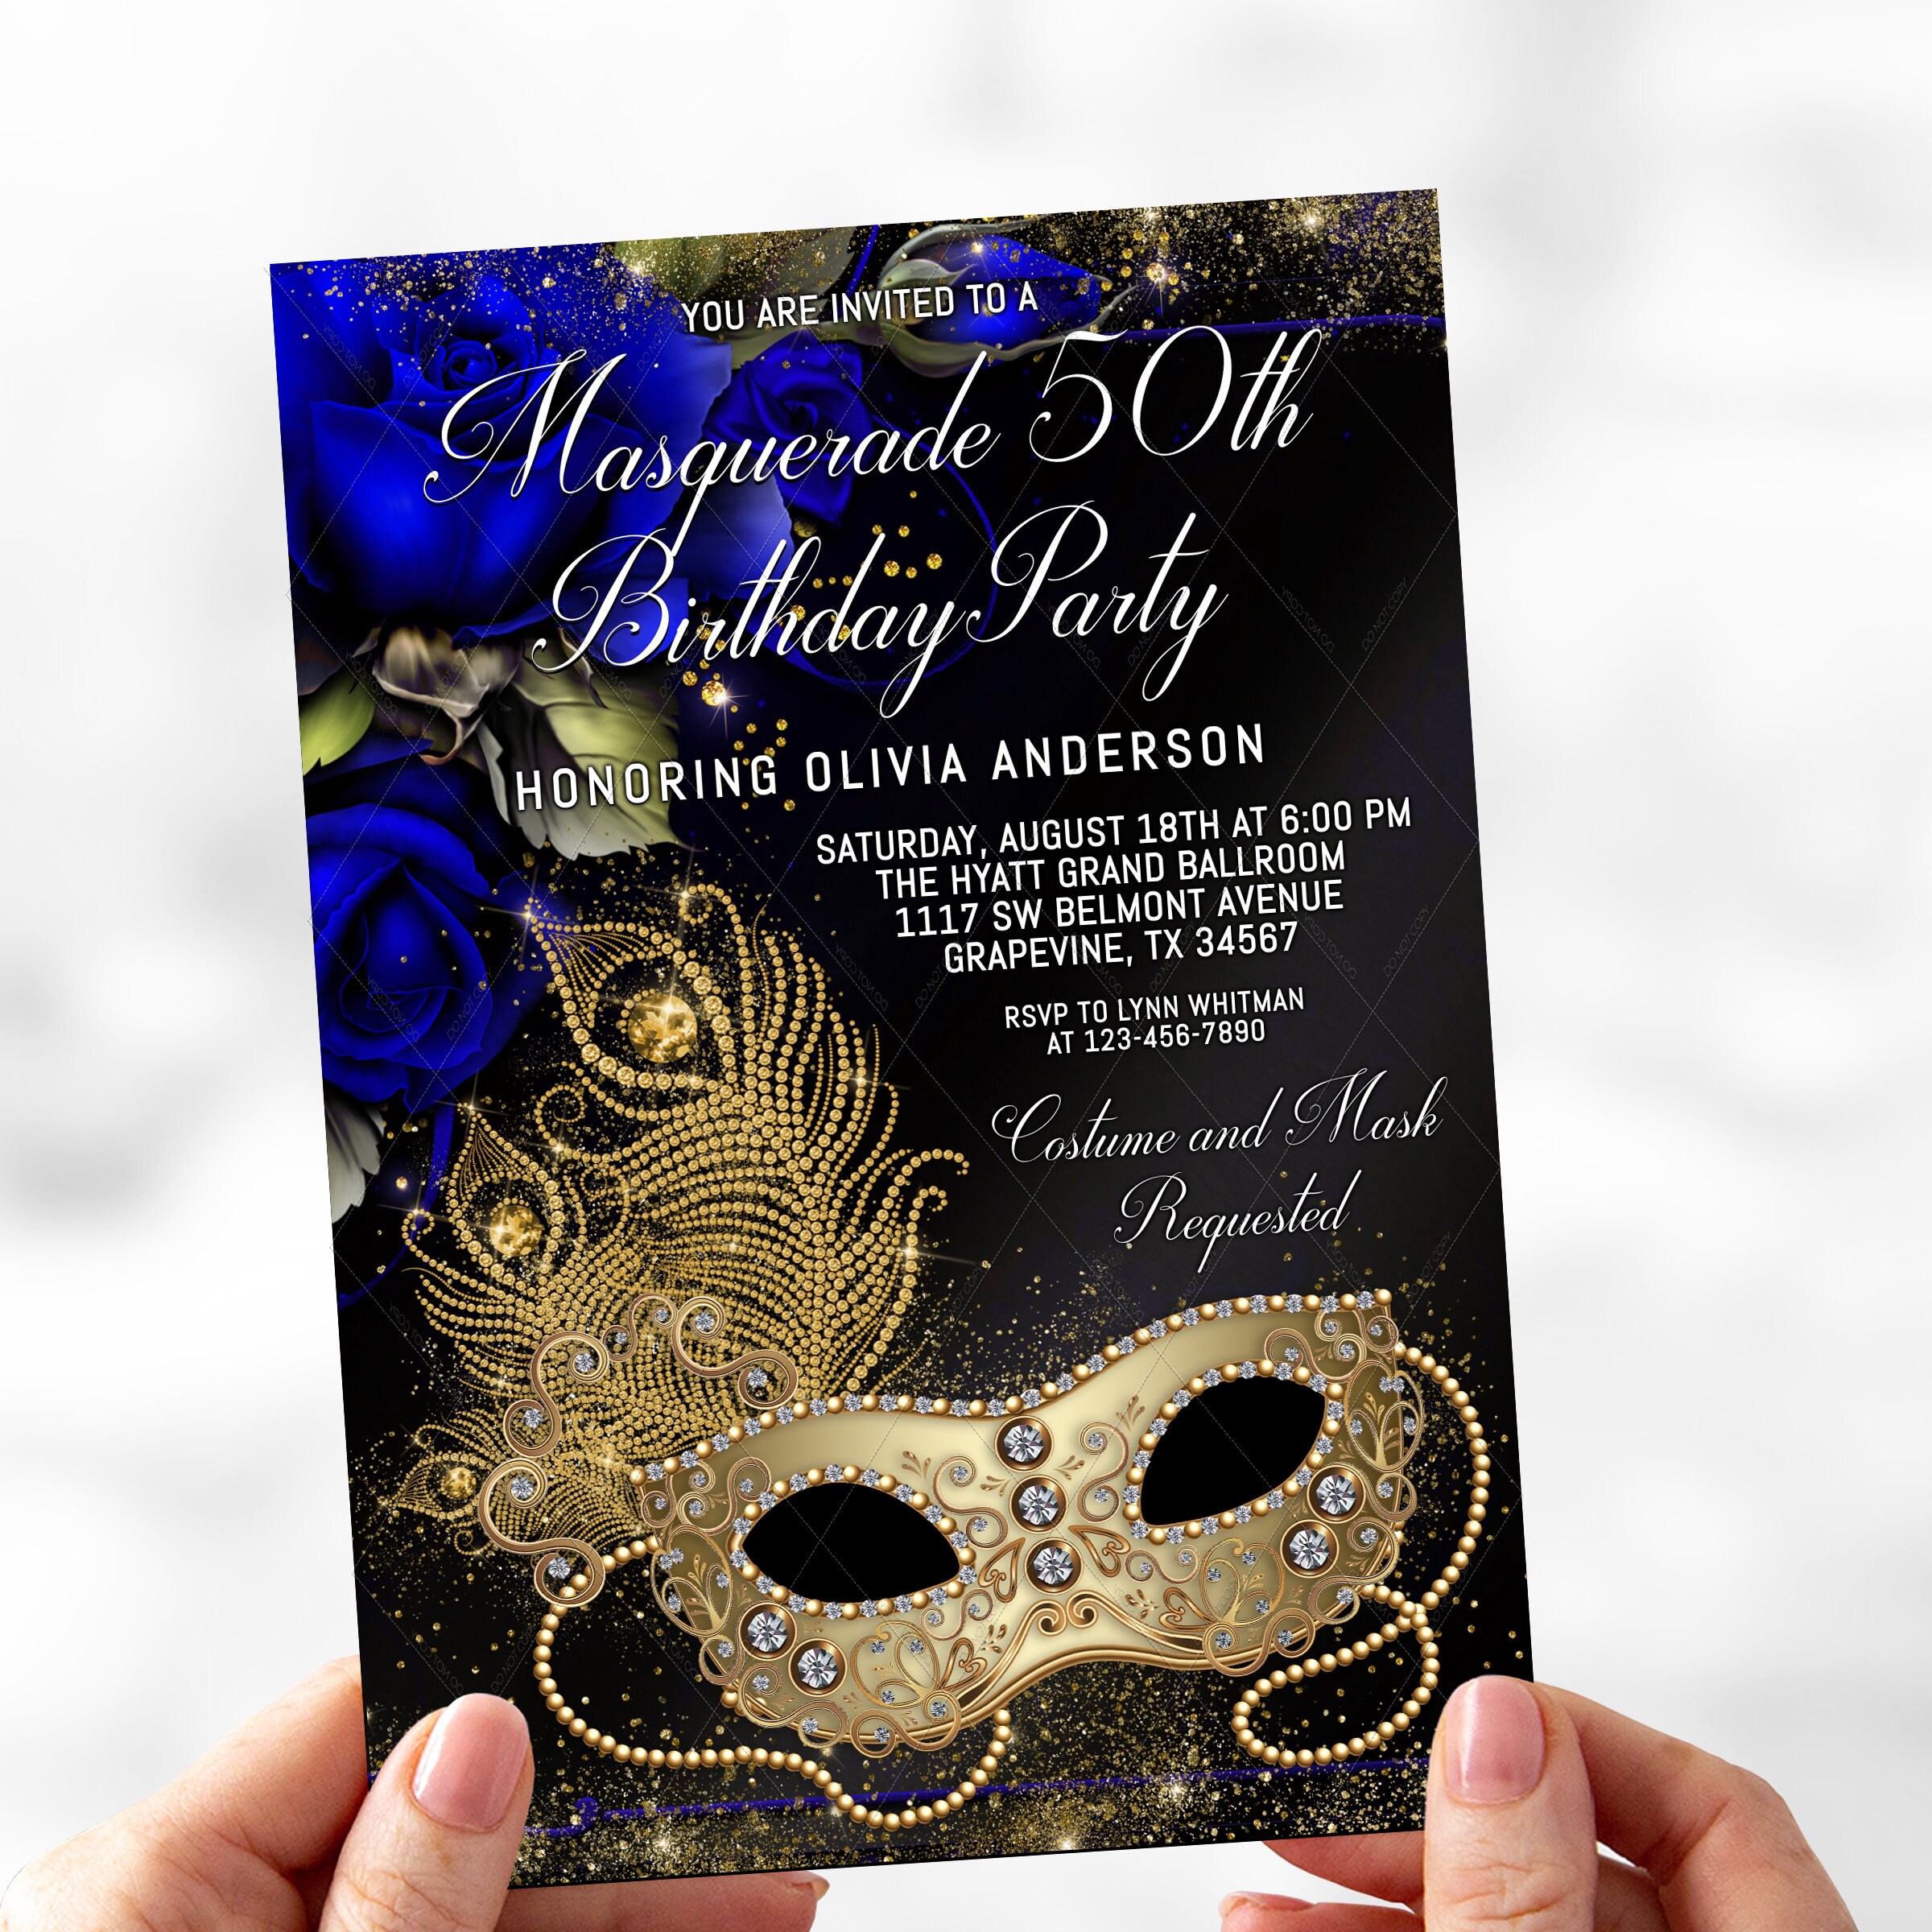 Masquerade - Venetian Mask Party Paper Charger and Table Decorations -  Chargerific Kit - Place Setting for 8